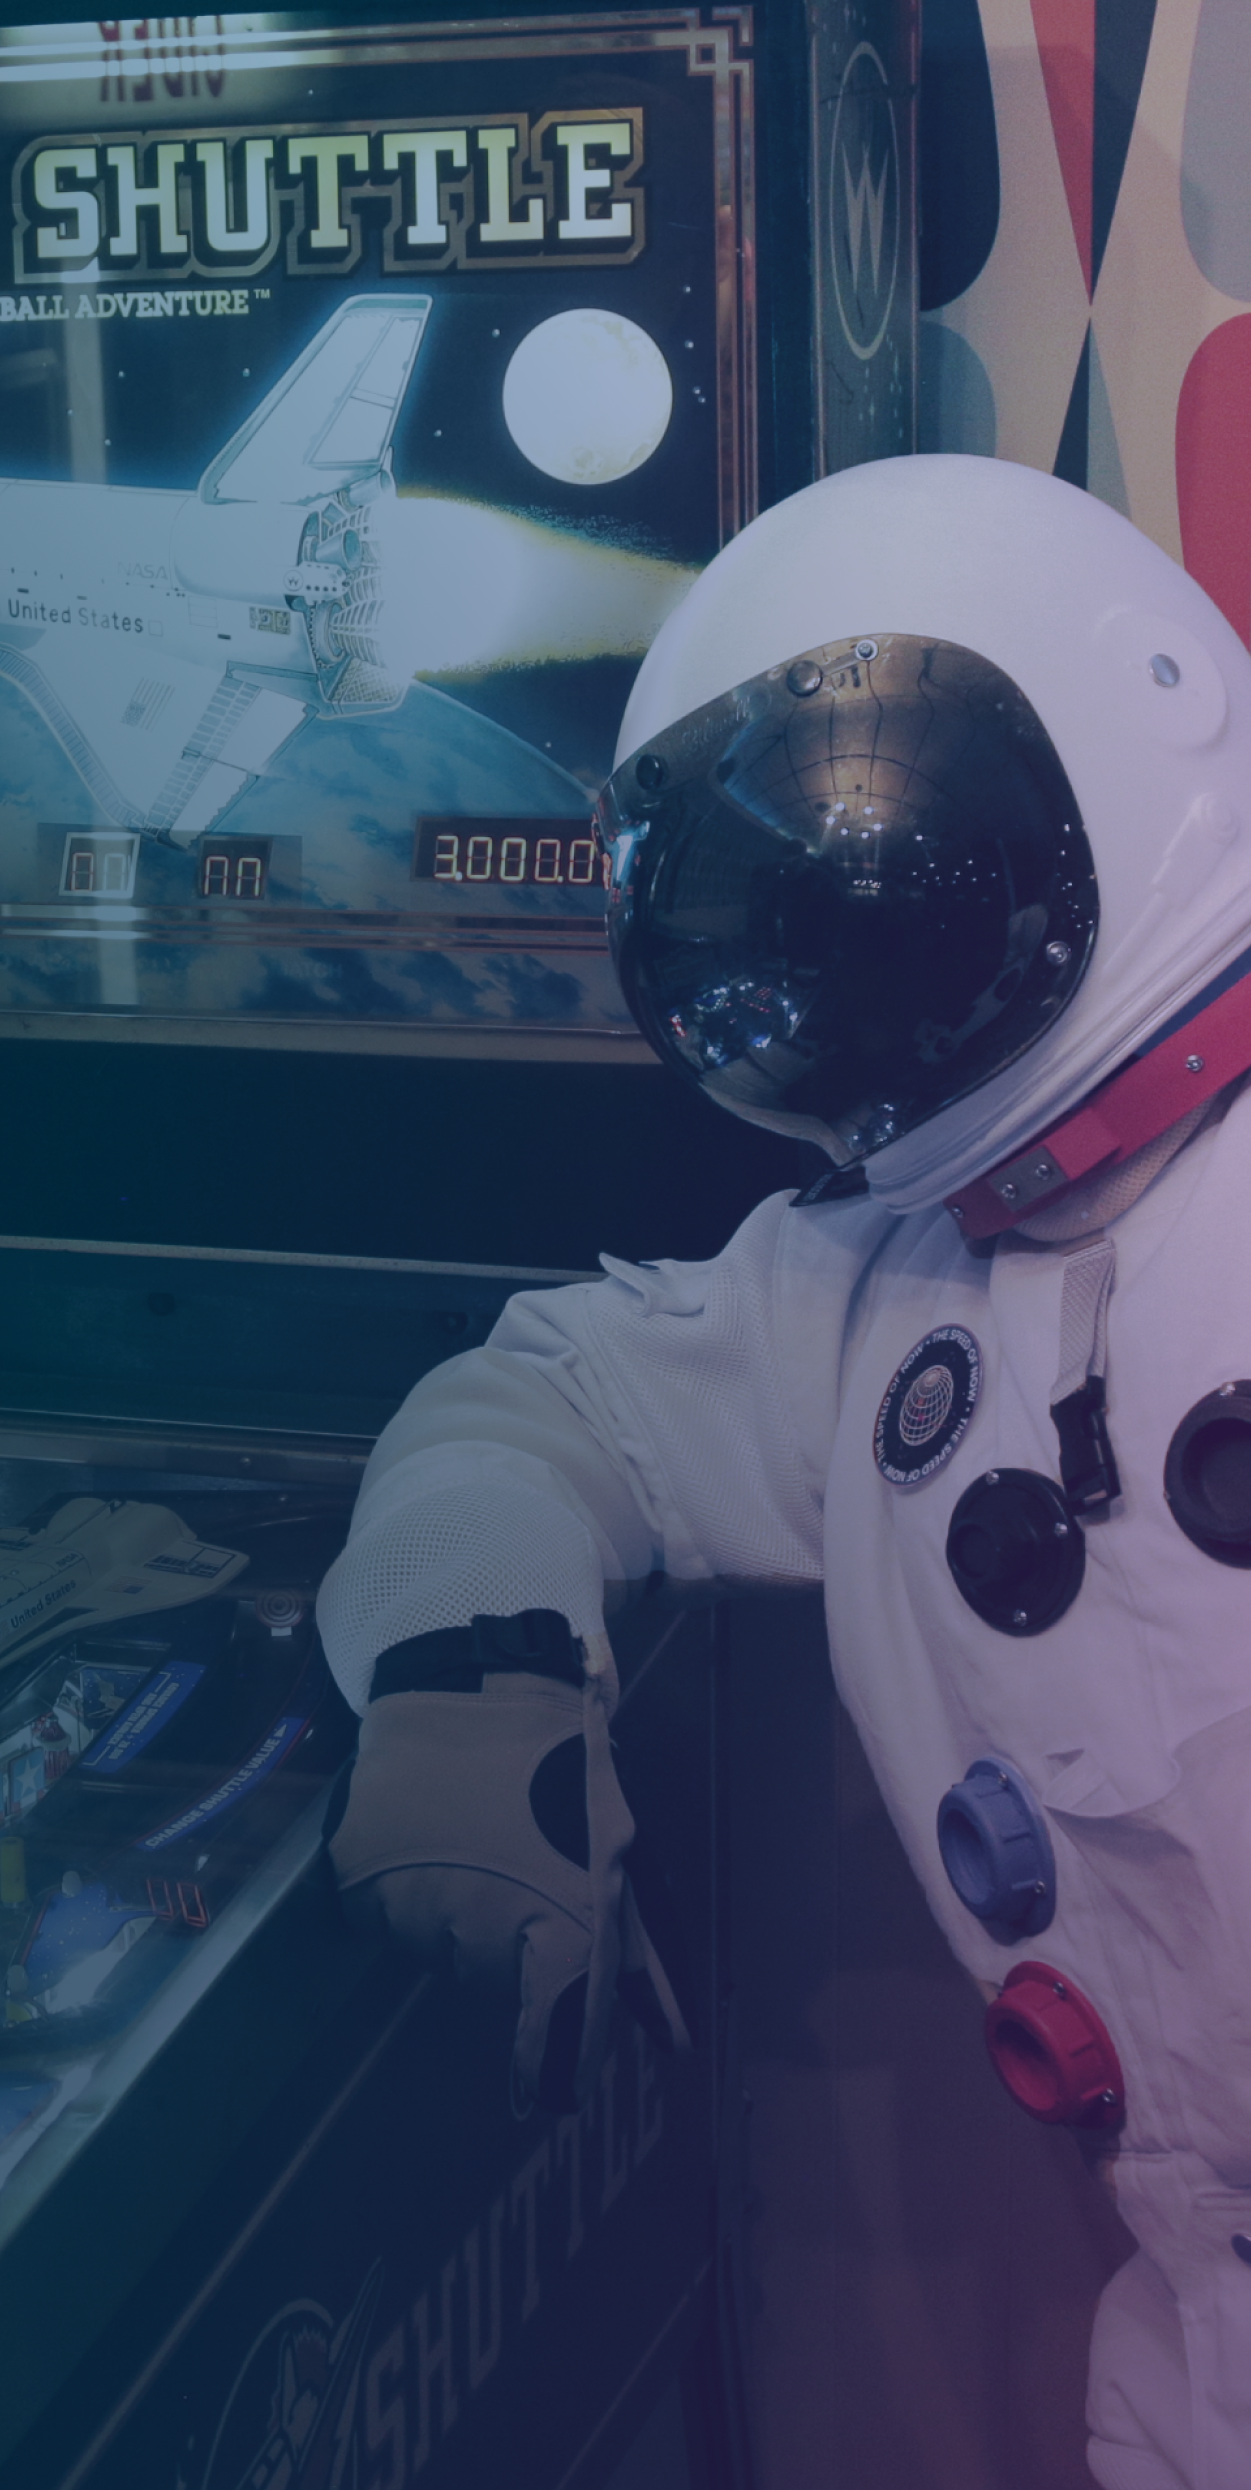 An astronaut leaning on a pinball machine.